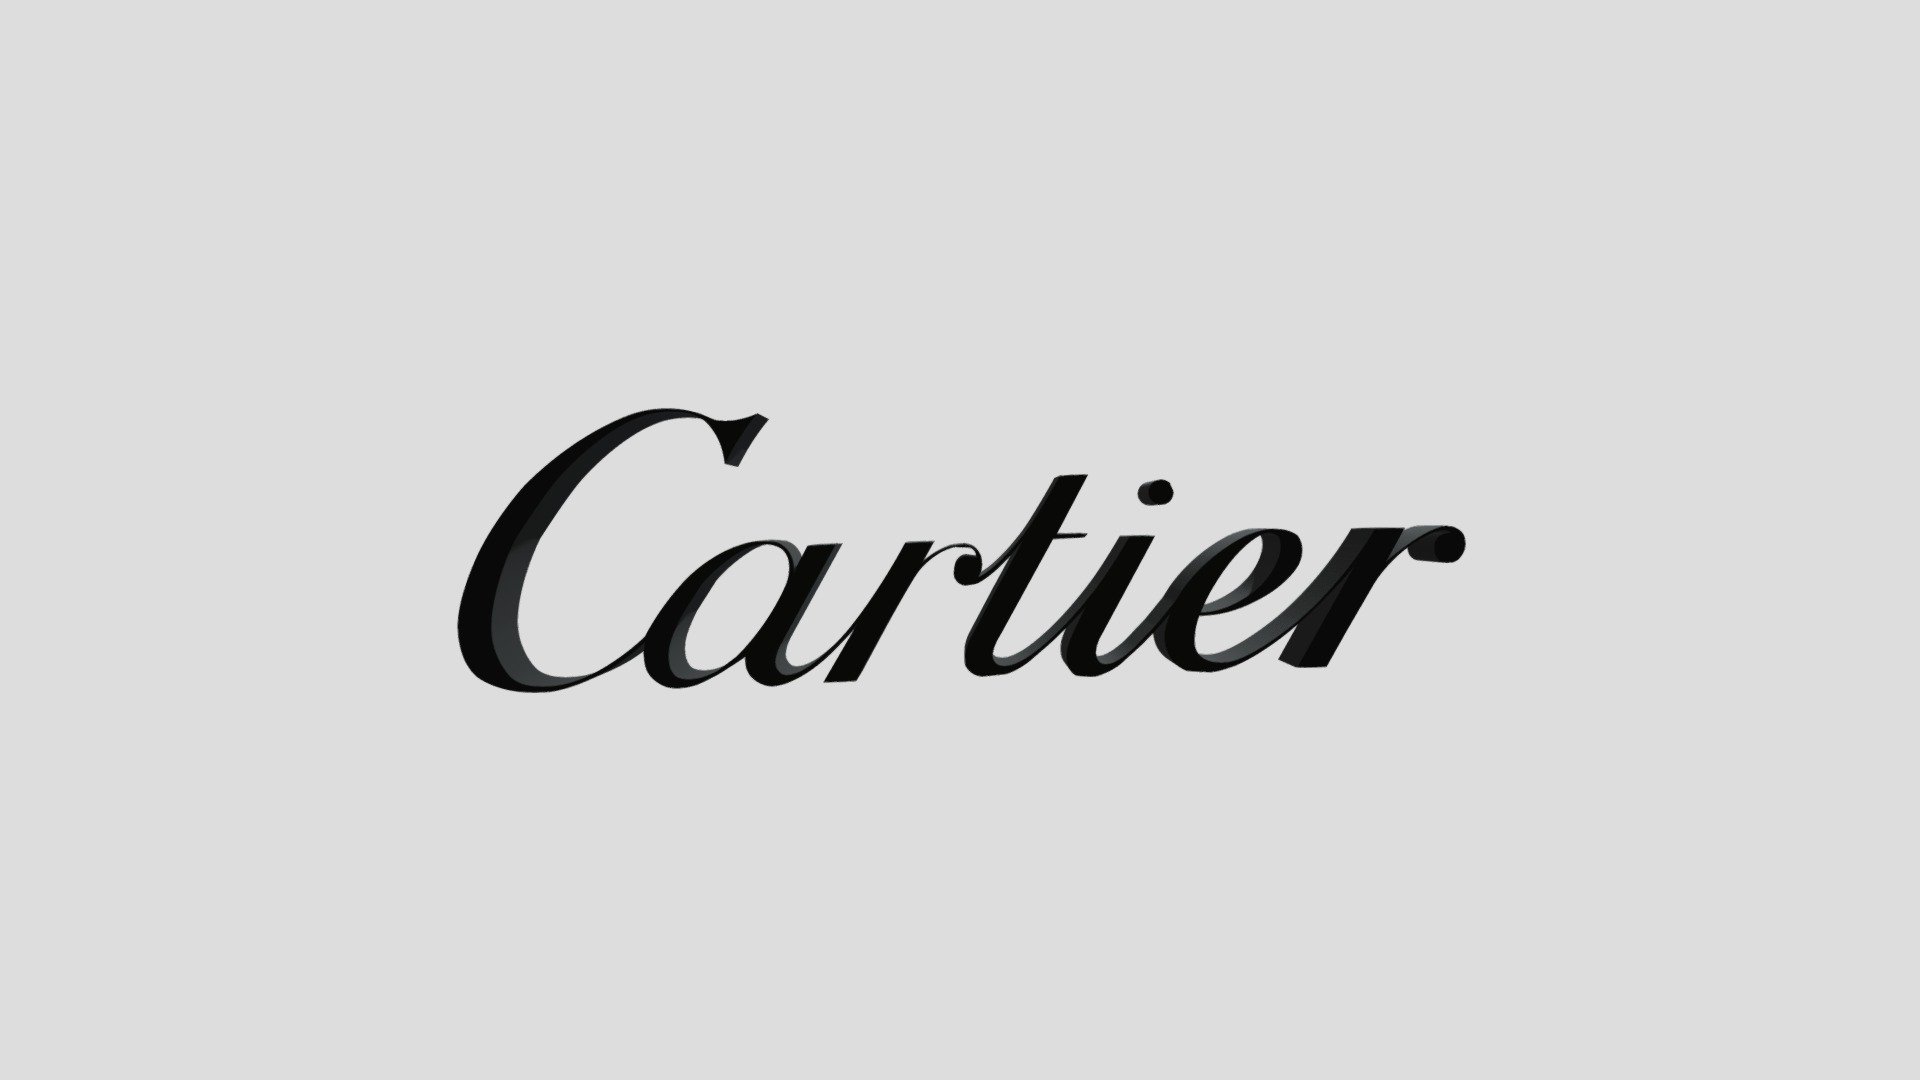 Cartier logo - Download Free 3D model by nicmitham [8b82083] - Sketchfab